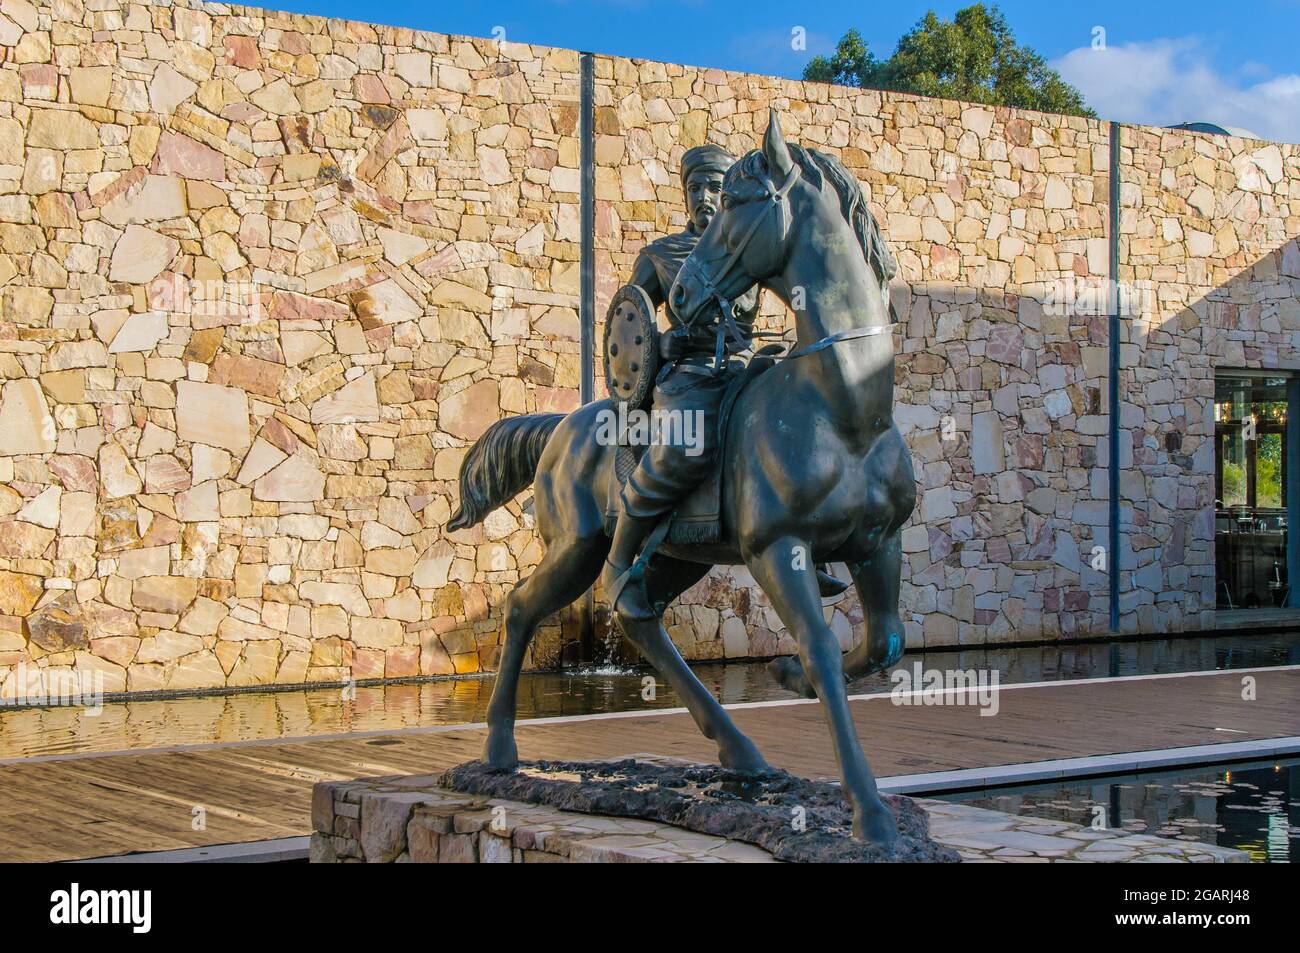 Impressive life-size bronze statue of the saracen knight, Saladin and his horse at Saracen Winery, Wilyabrup, Margaret River, Western Australia. Stock Photo